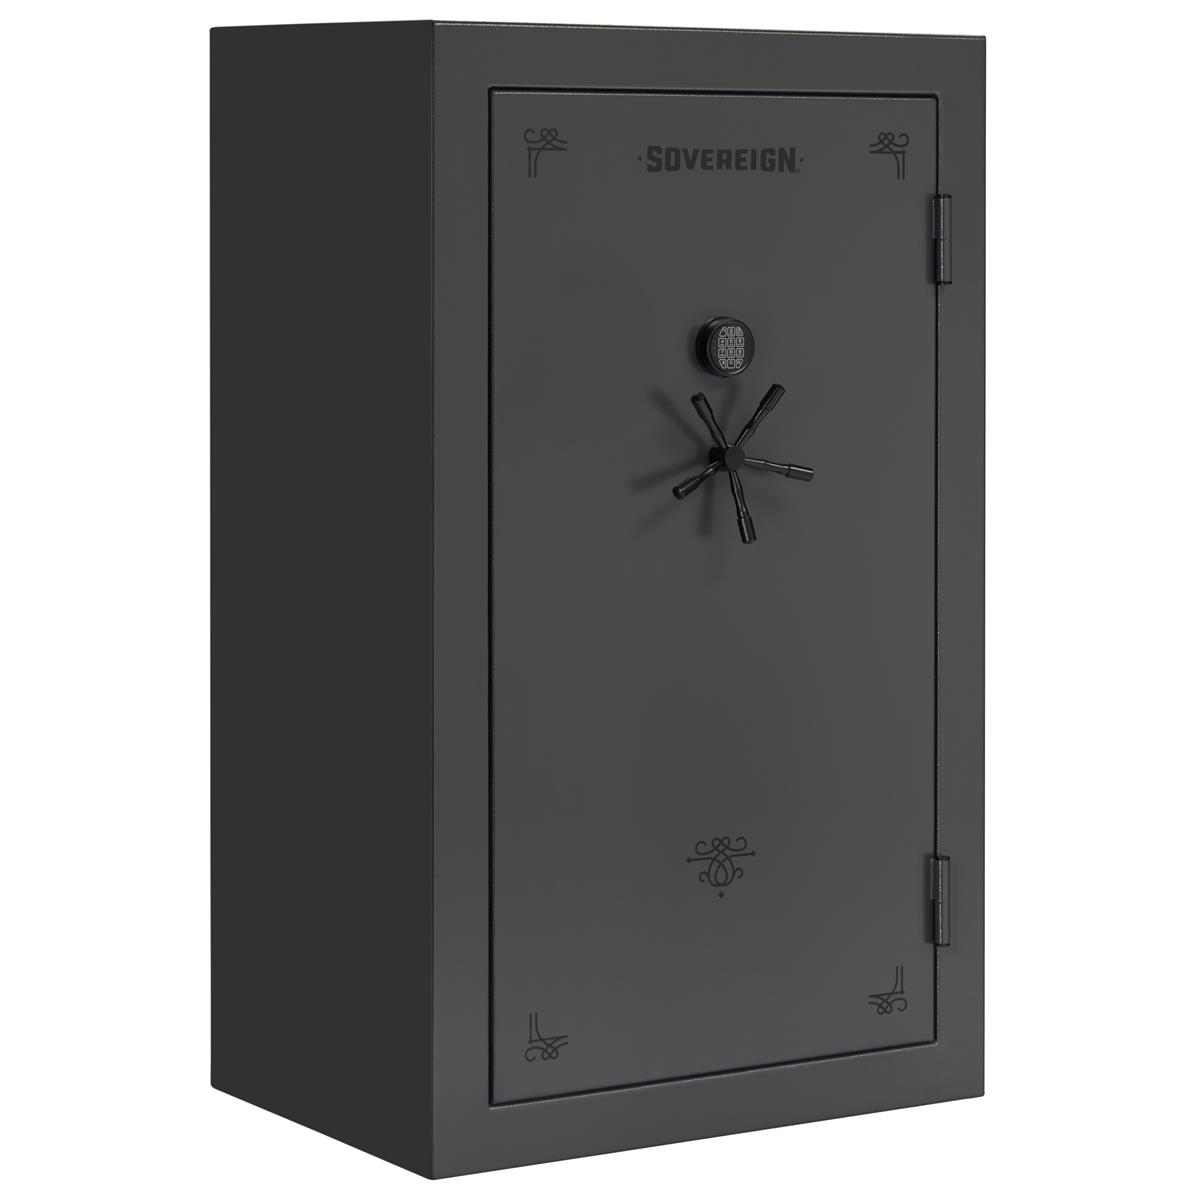 Stack-On 60-Gun Capacity Safe with Electronic Lock, 72" Tall, Textured Gray -  S-60-DGP-E-S-72